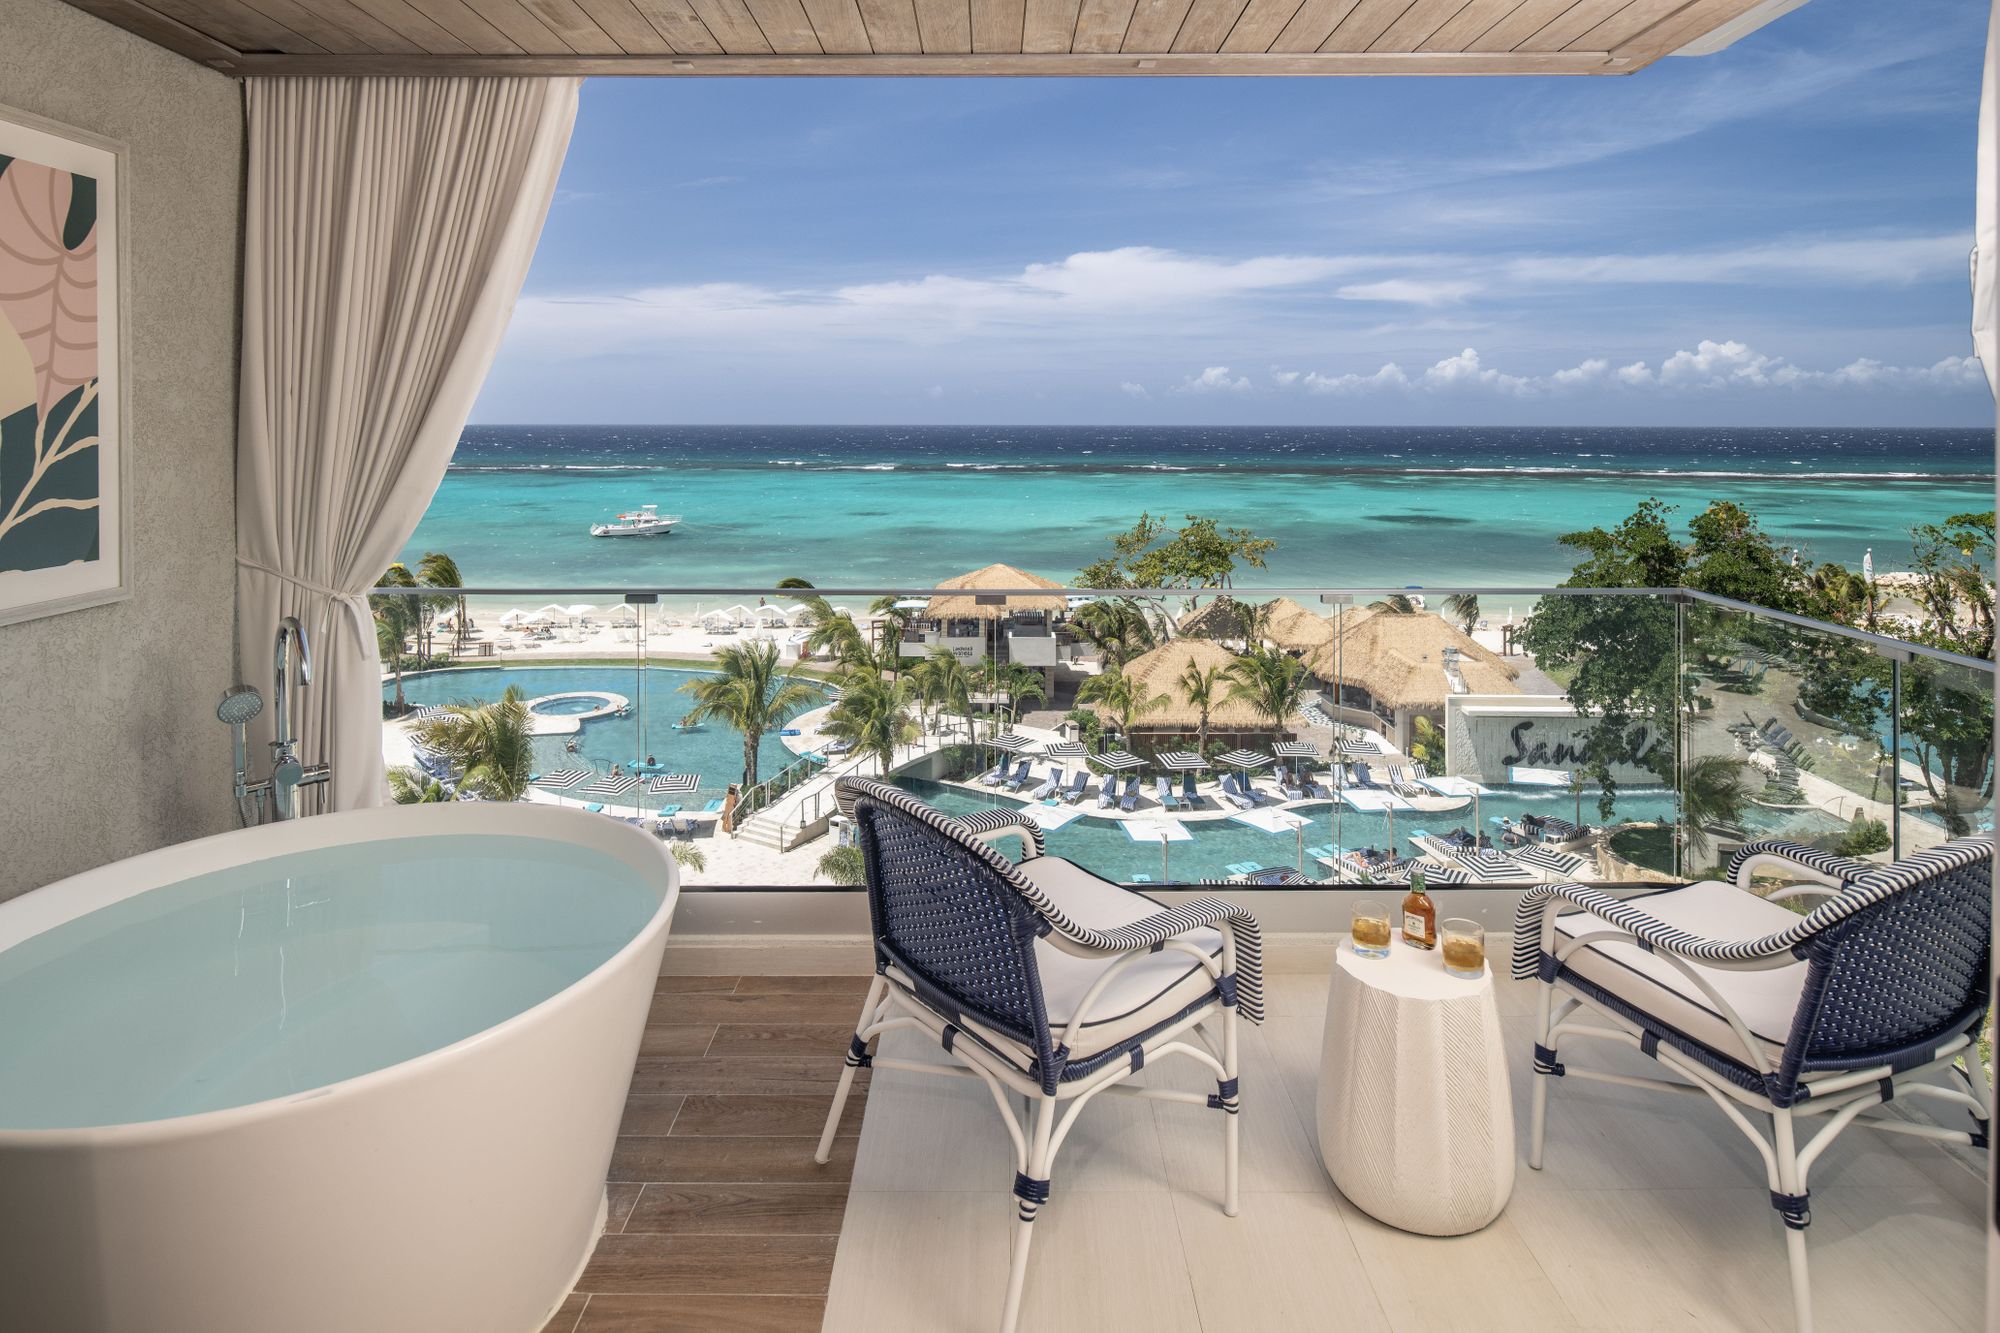 How Much It Costs To Stay At Sandals & Why It’s Worth The Money